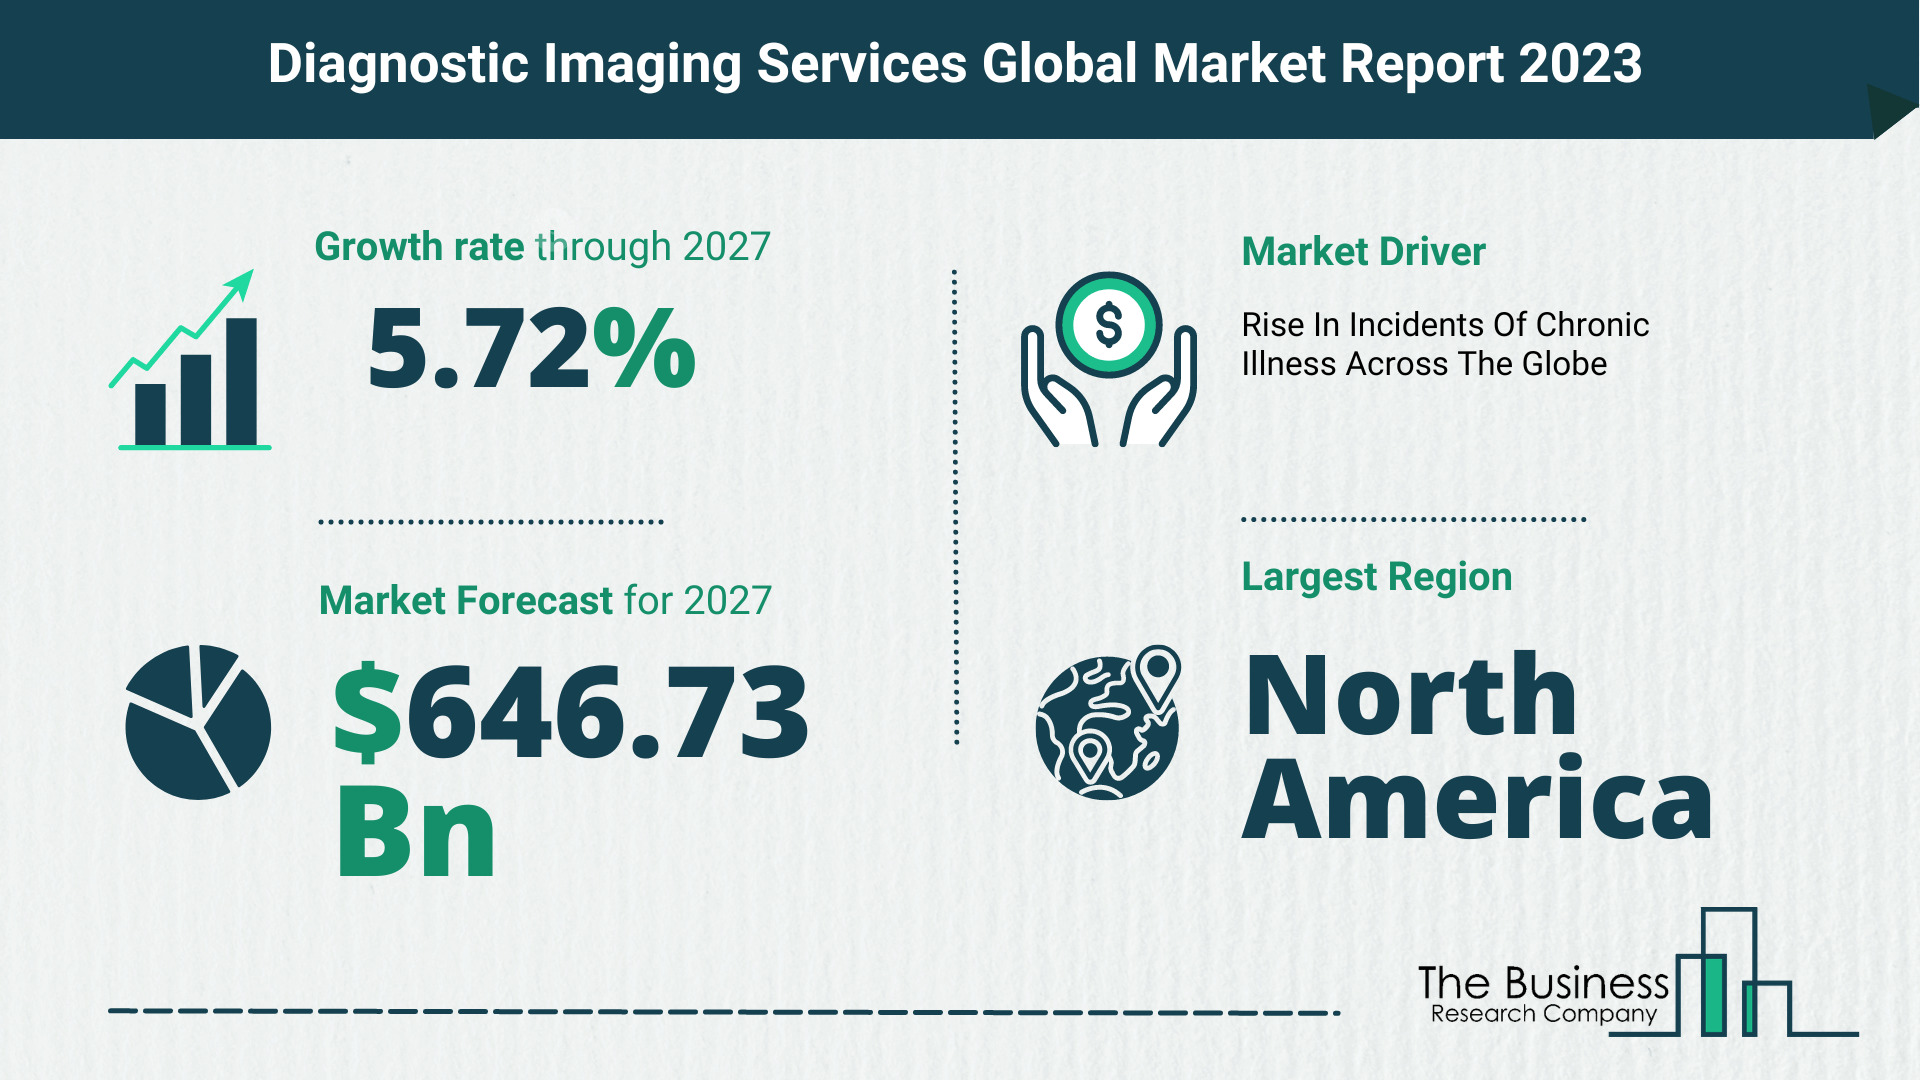 How Will The Diagnostic Imaging Services Market Globally Expand In 2023?